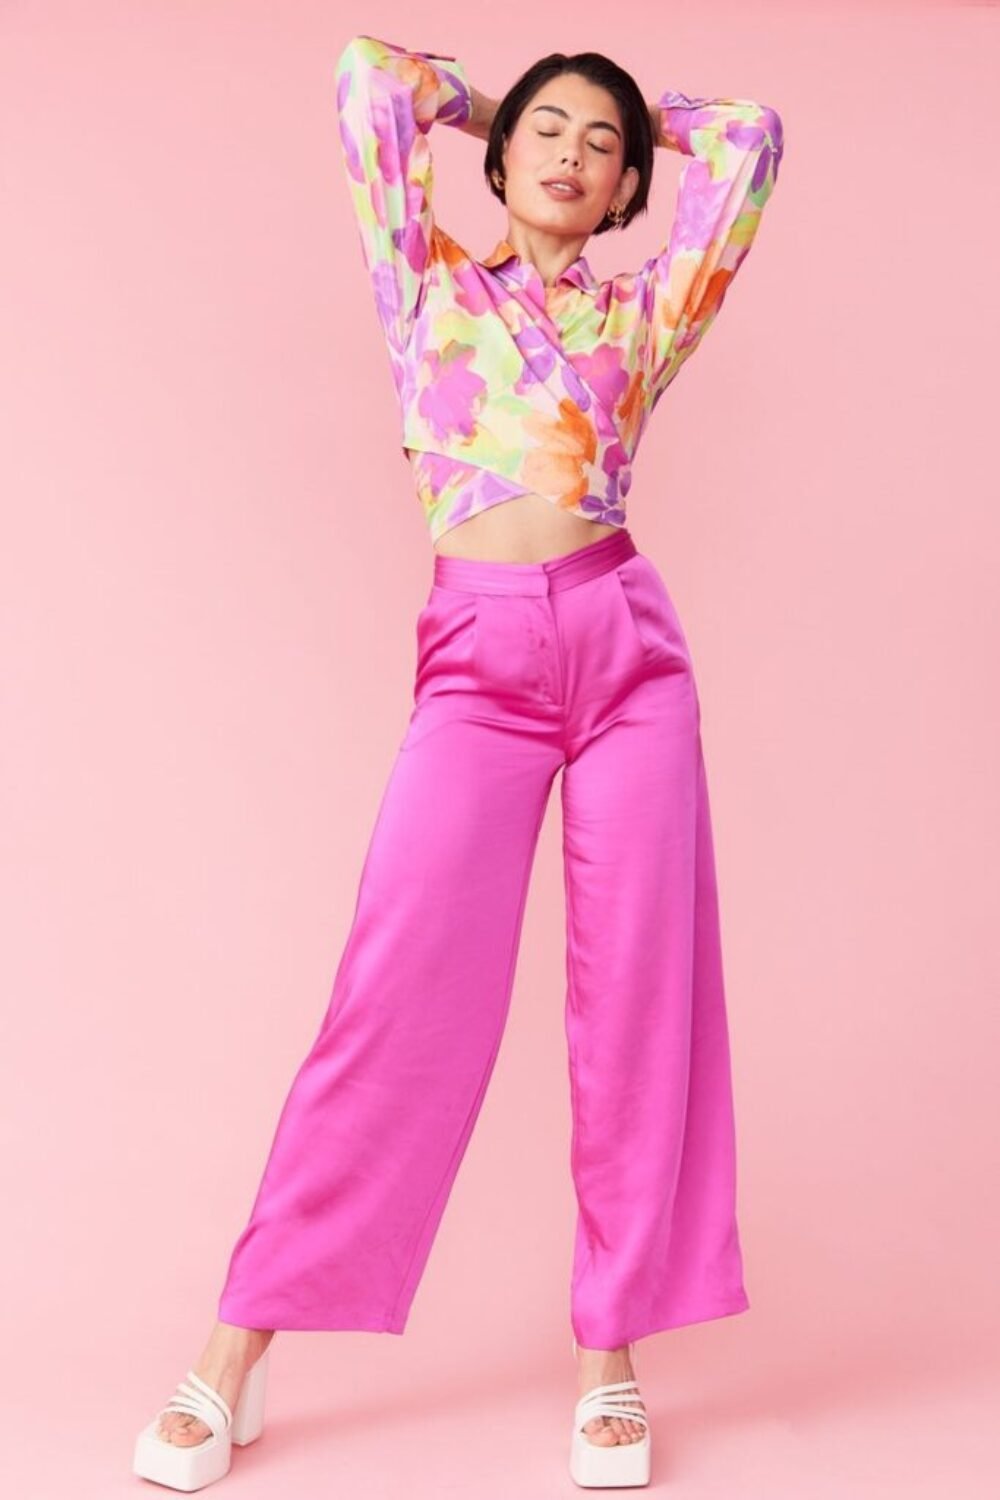 Shop Lux Sustainable Rose Petal Blouse and women's luxury and designer clothes at www.lux-apparel.co.uk